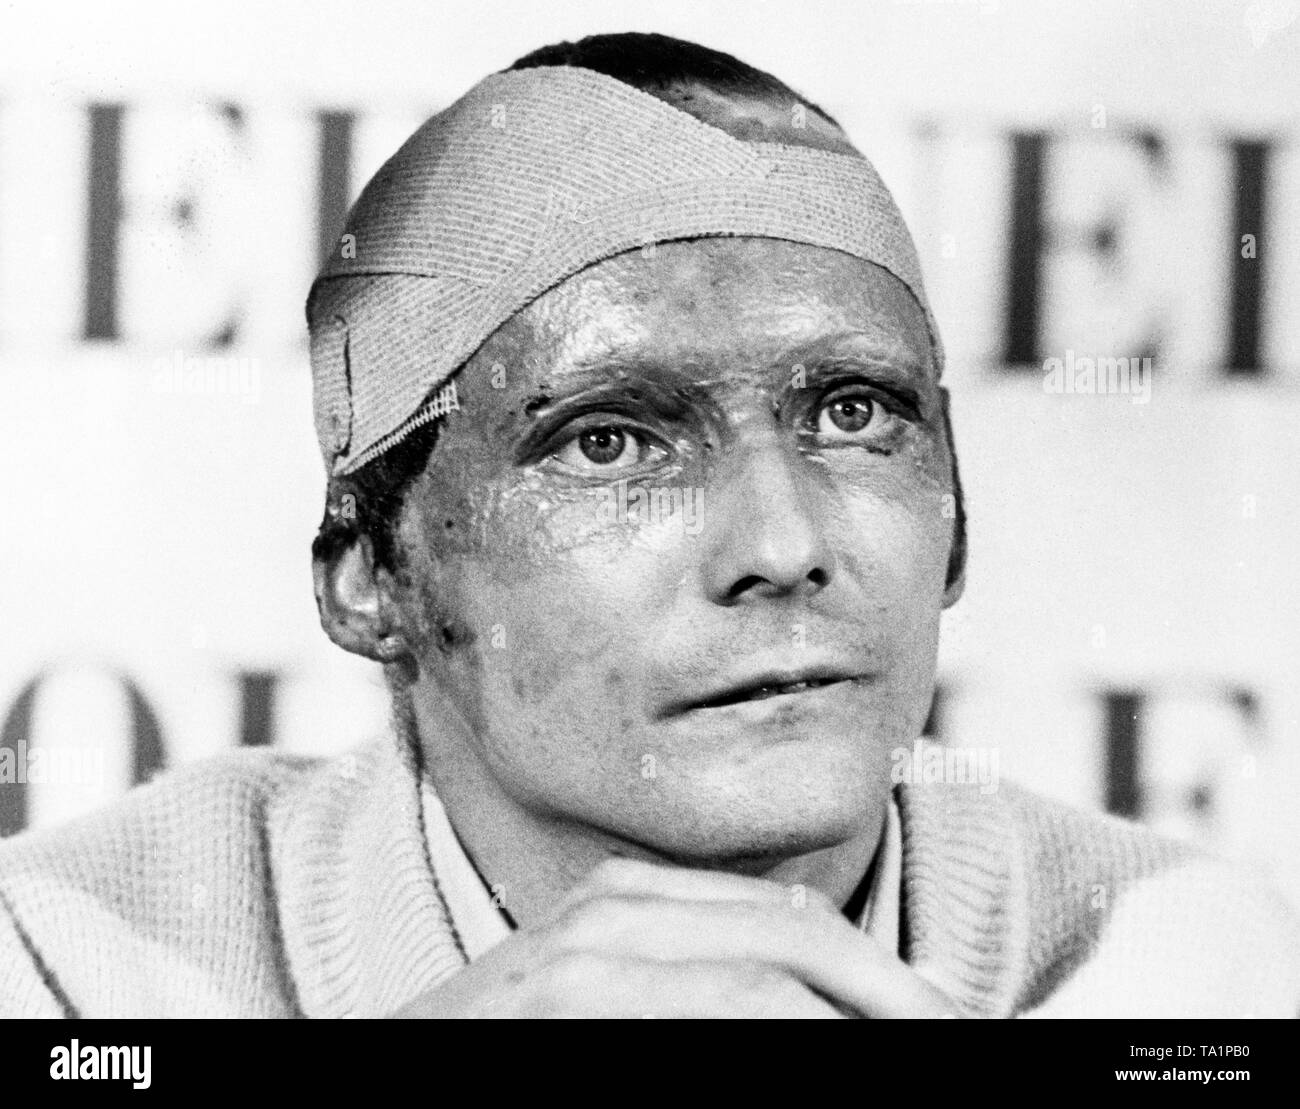 Austrian driver, Niki Lauda, after his skin grafting operation following  his crash in the 1976 German Grand Prix at the Nurburgring. *UK USE ONLY  Stock Photo - Alamy